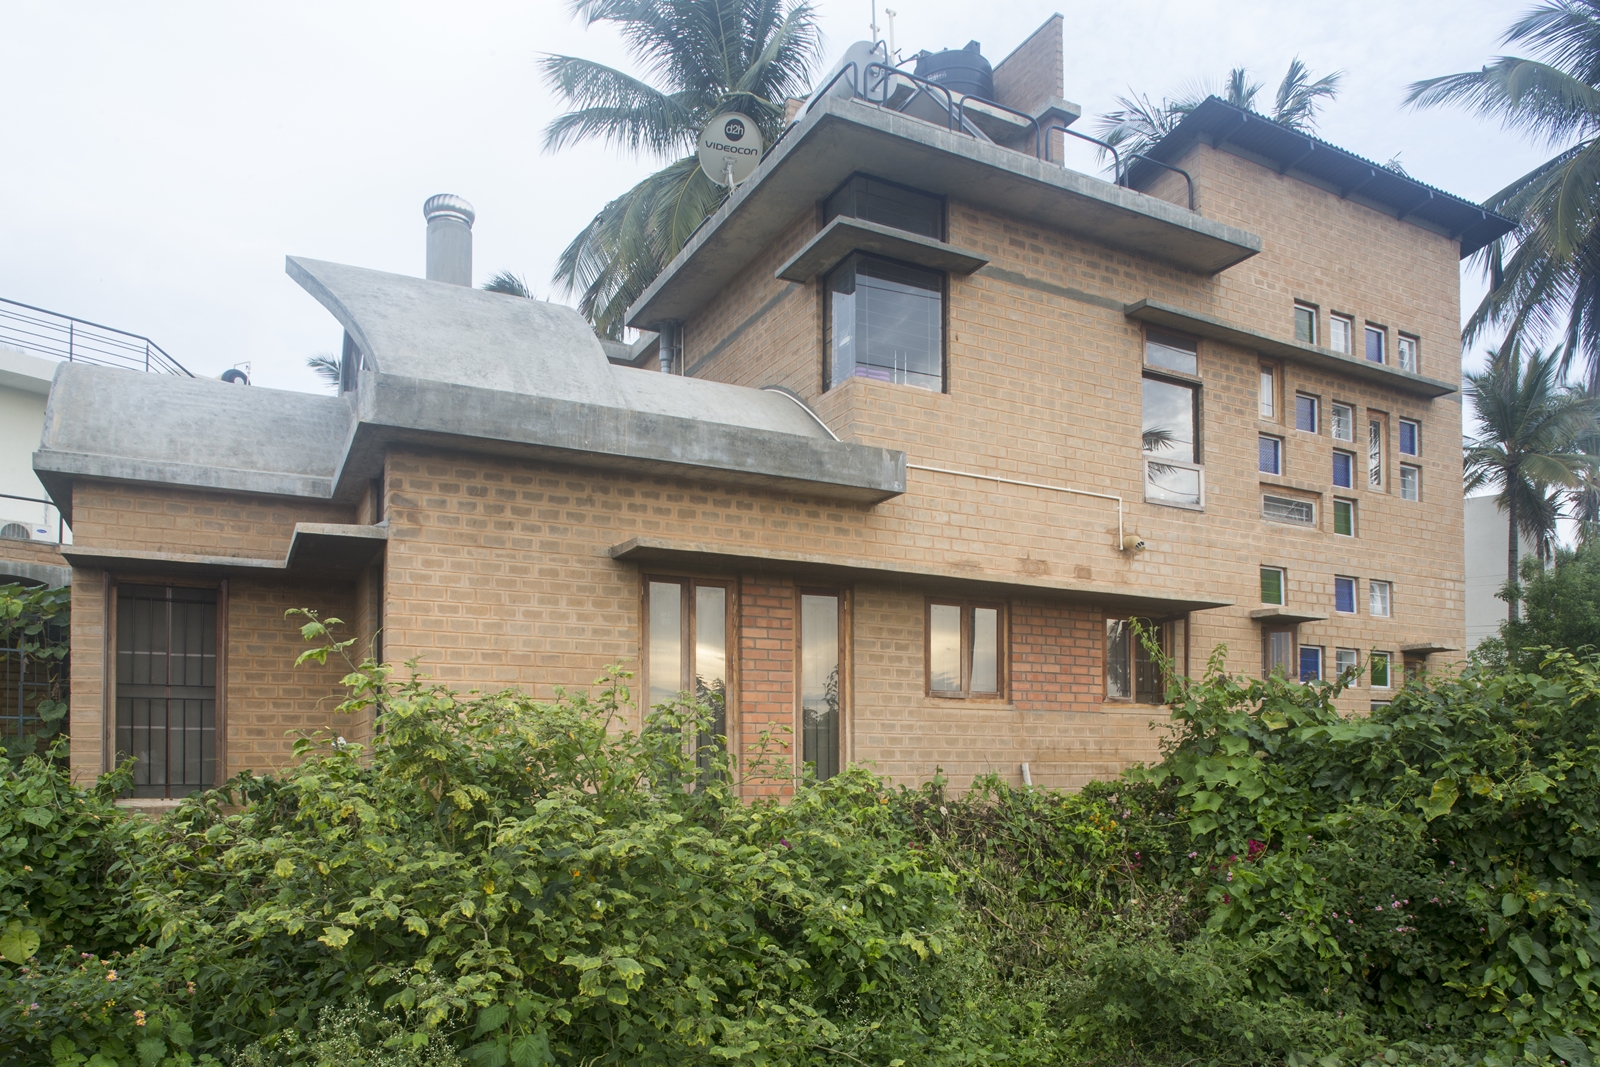 Residence for Charis, at Bangalore, by Biome Environmental 1